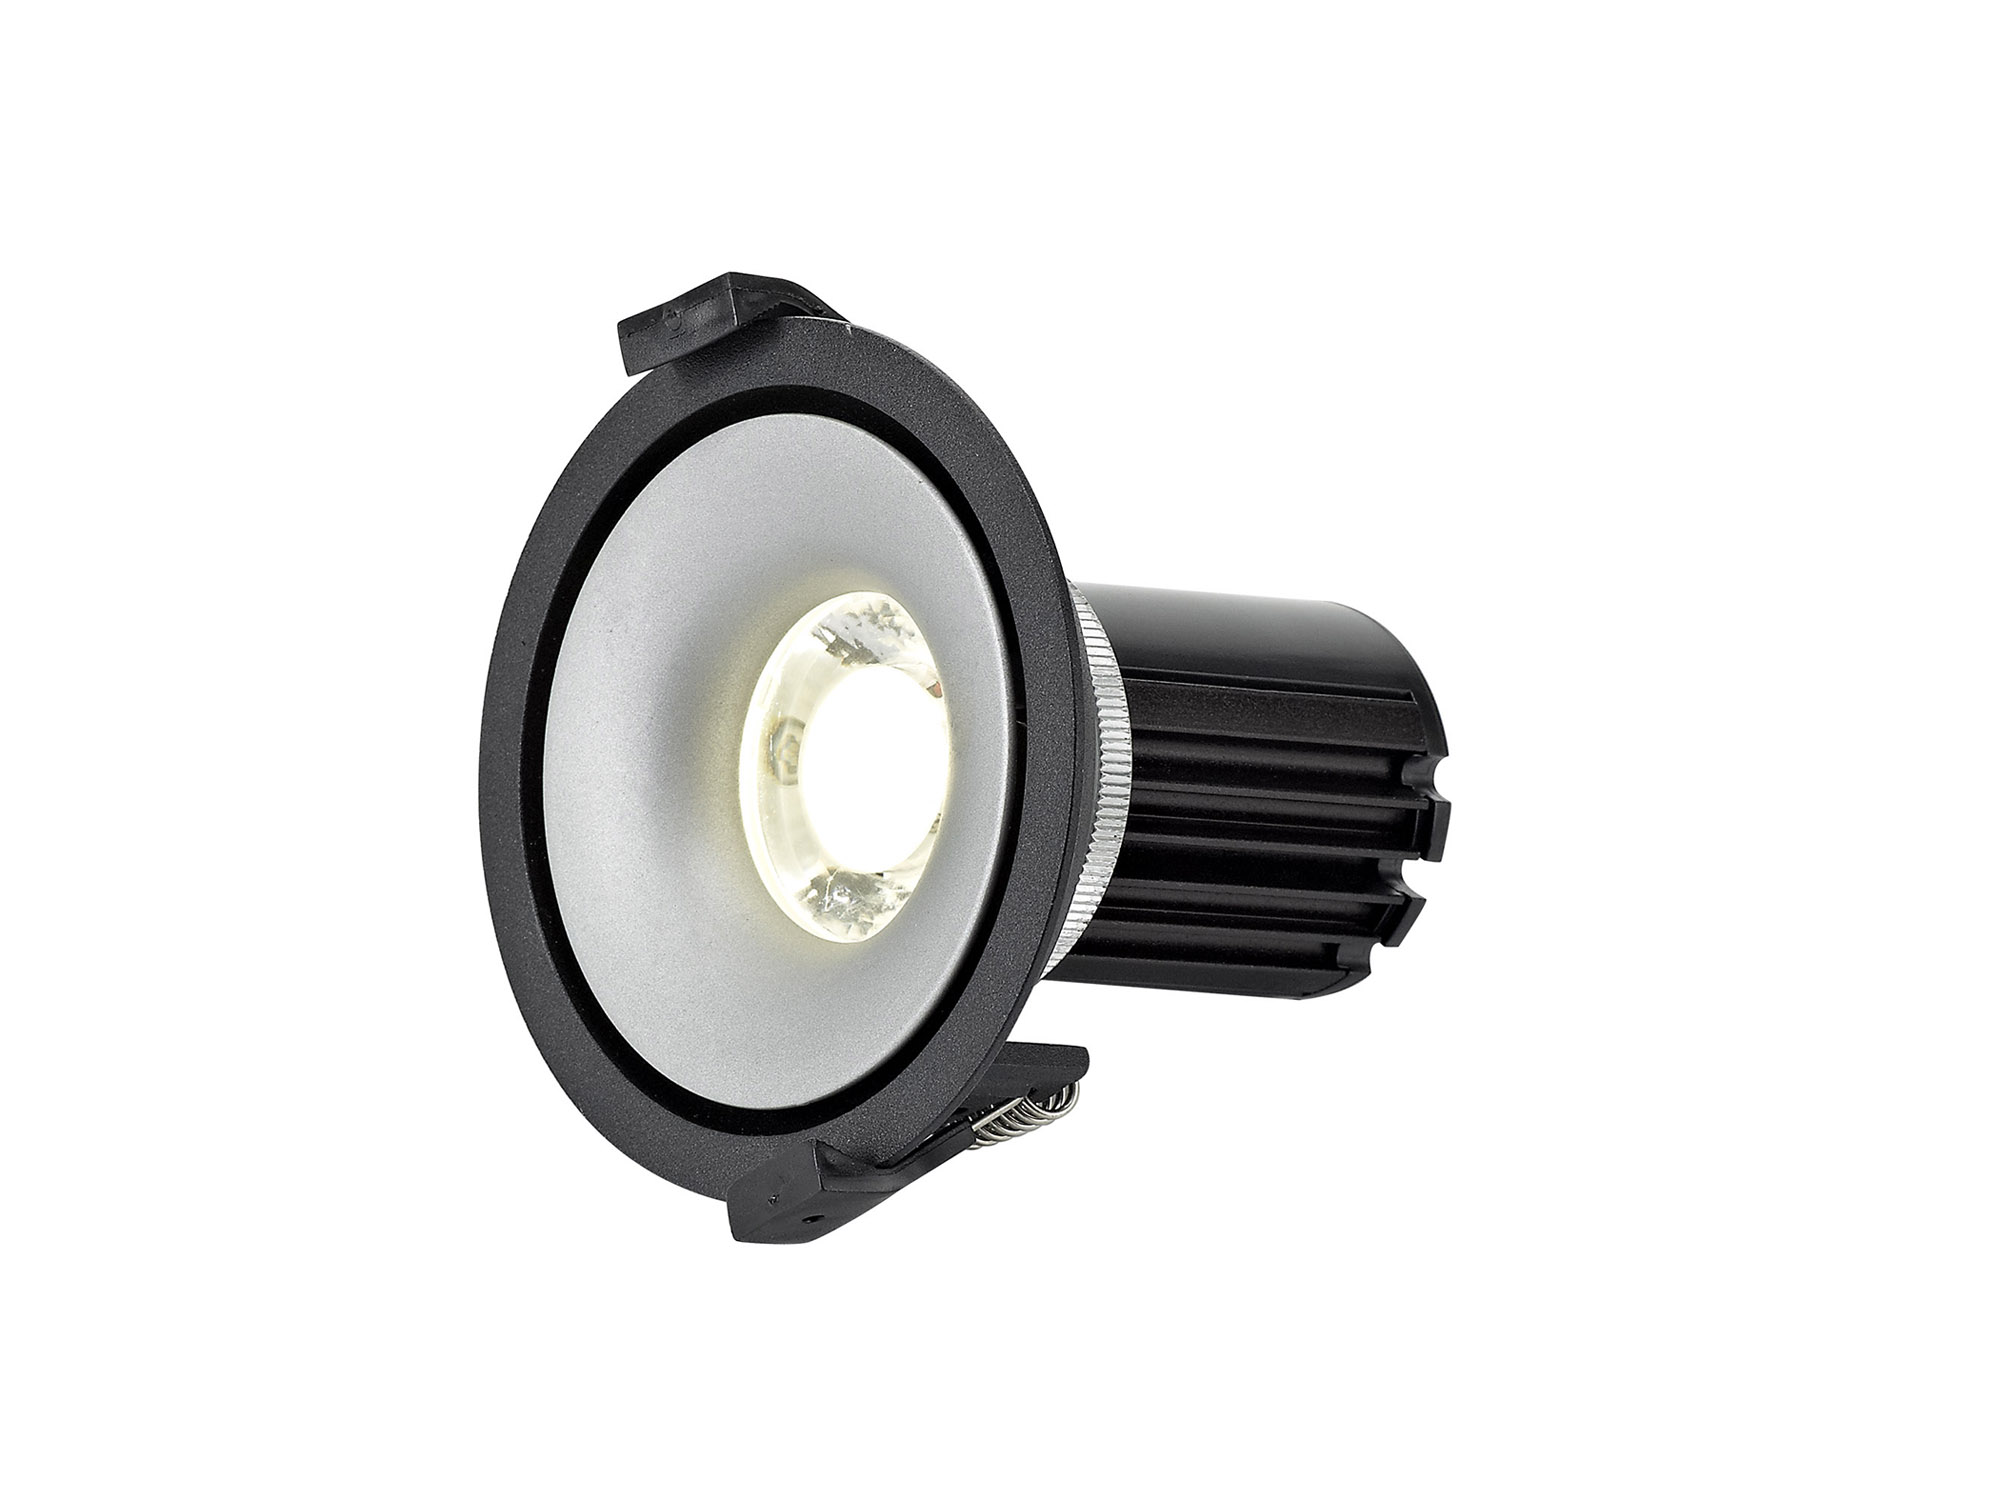 DM201078  Bolor 10 Tridonic Powered 10W 4000K 810lm 36° CRI>90 LED Engine Black/Silver Fixed Recessed Spotlight, IP20